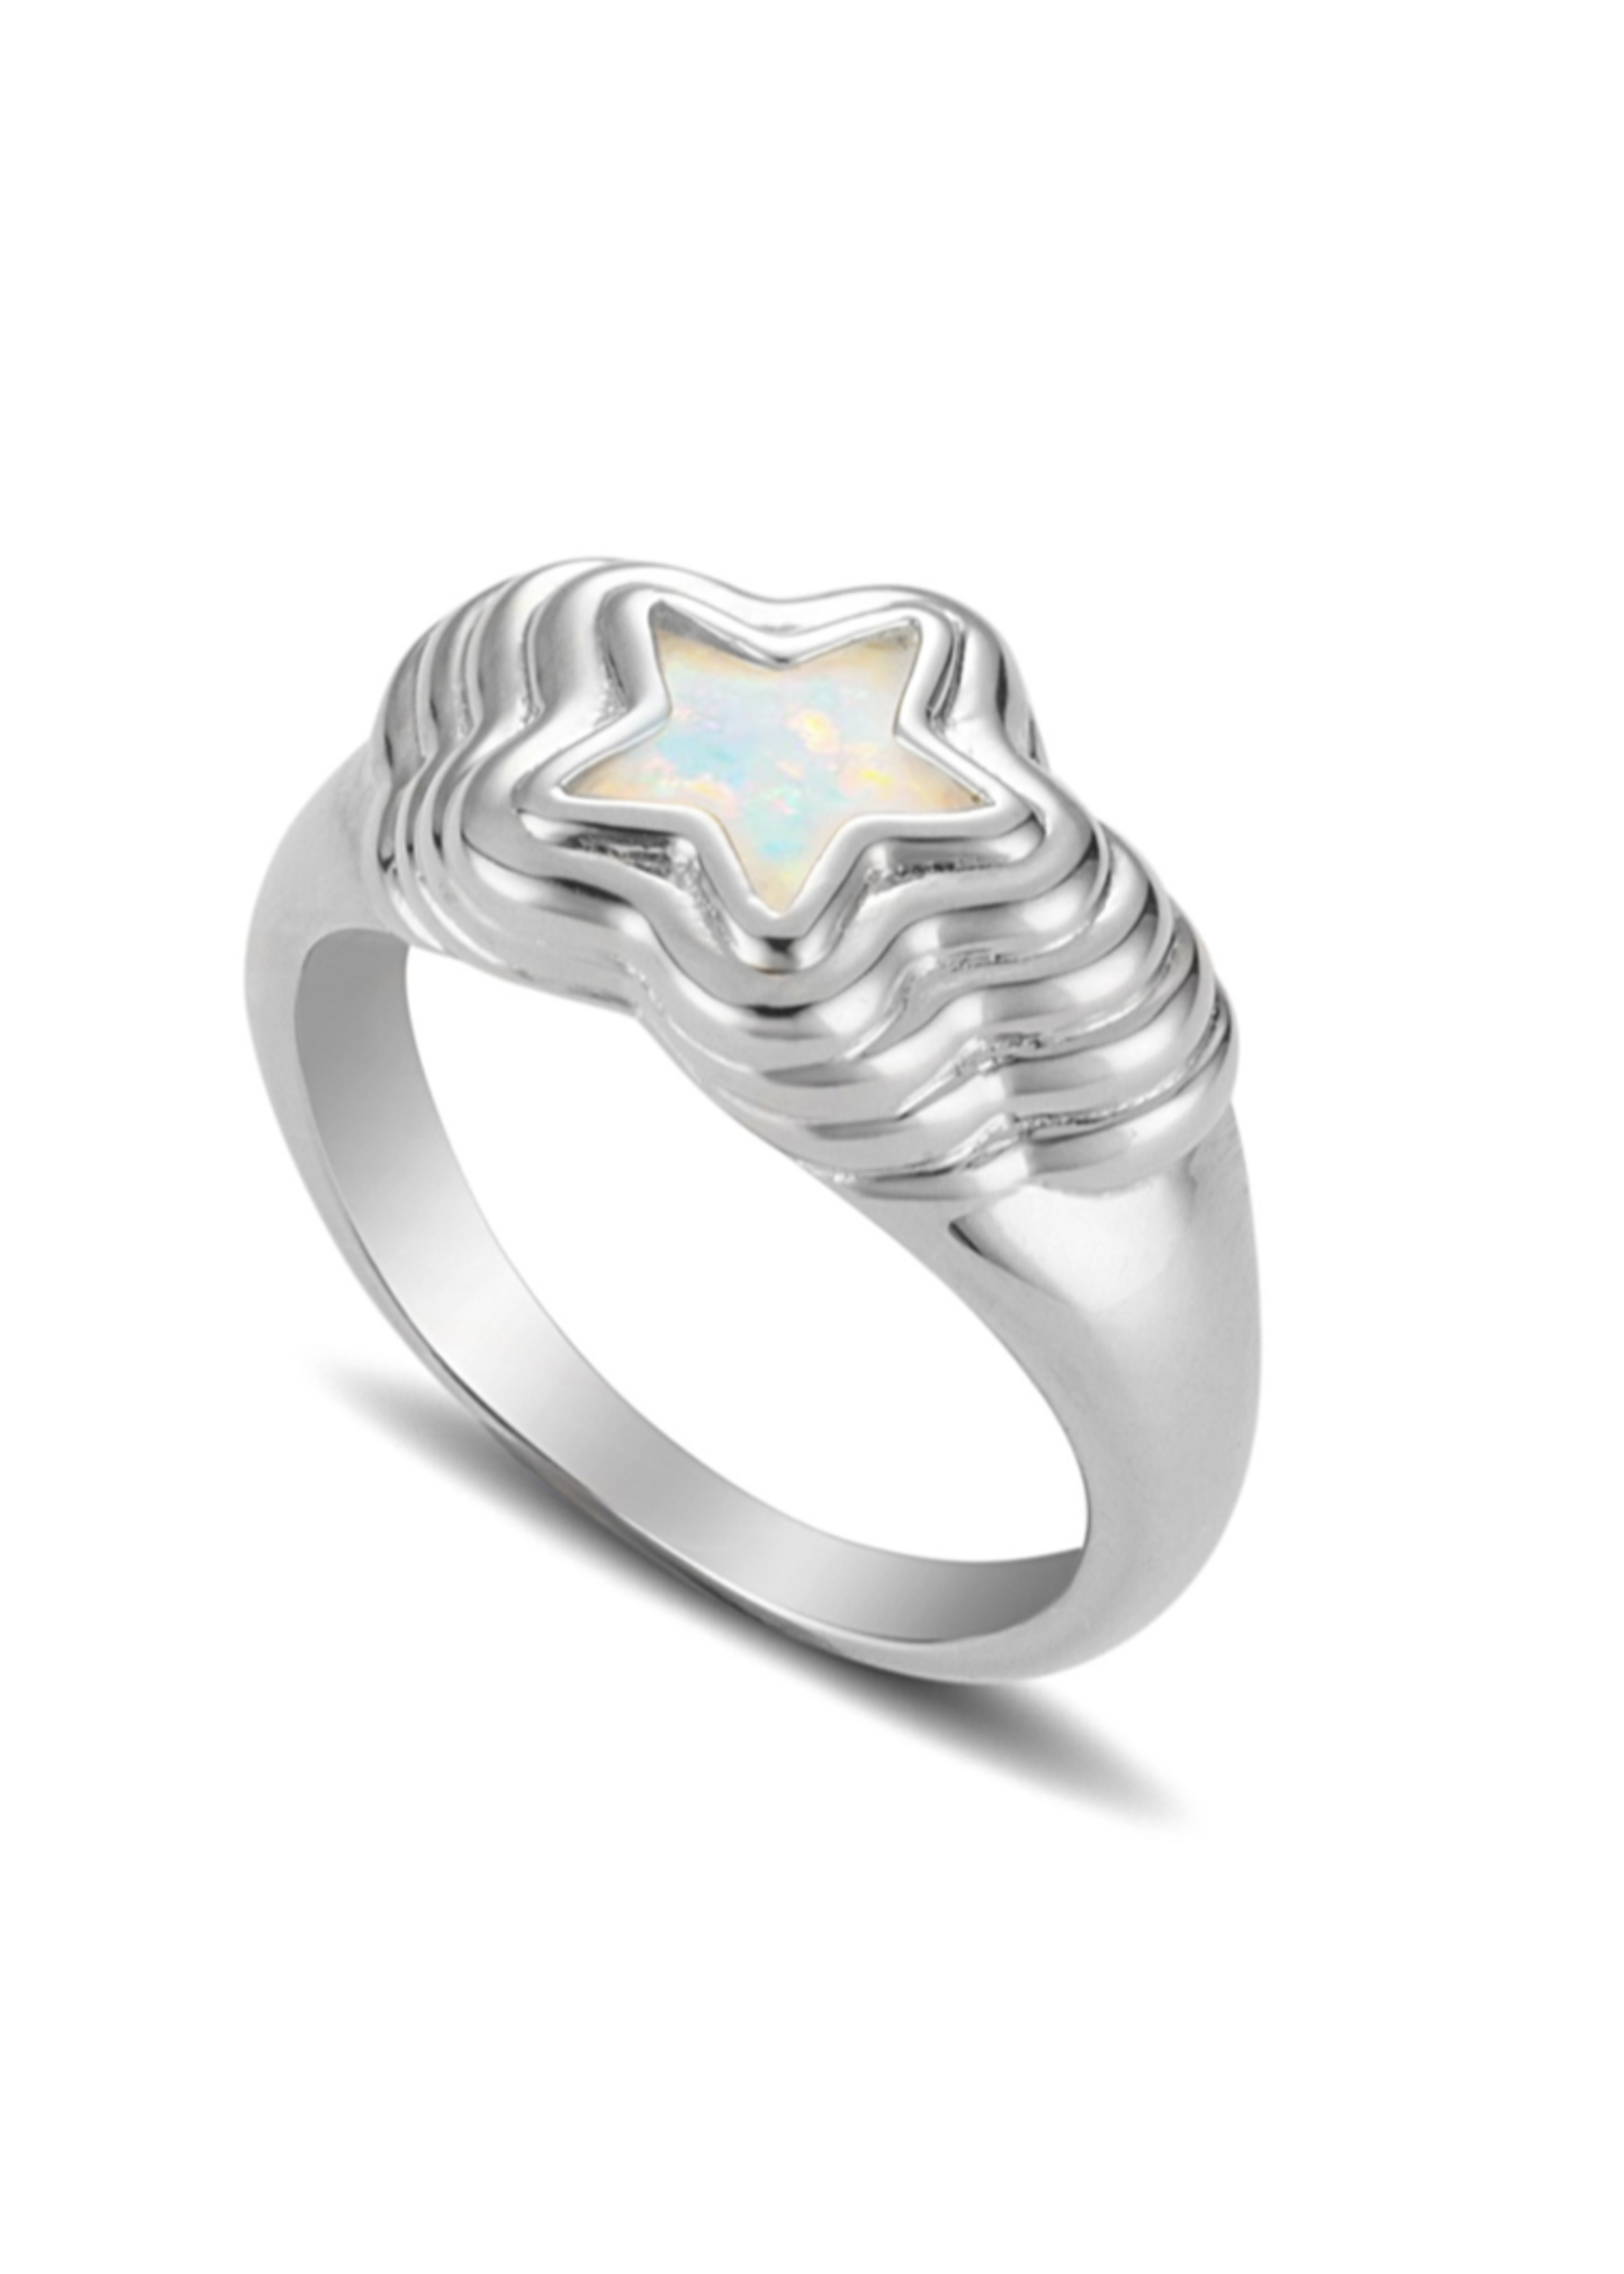 July Child The Starstruck Ring in Opal and Silver